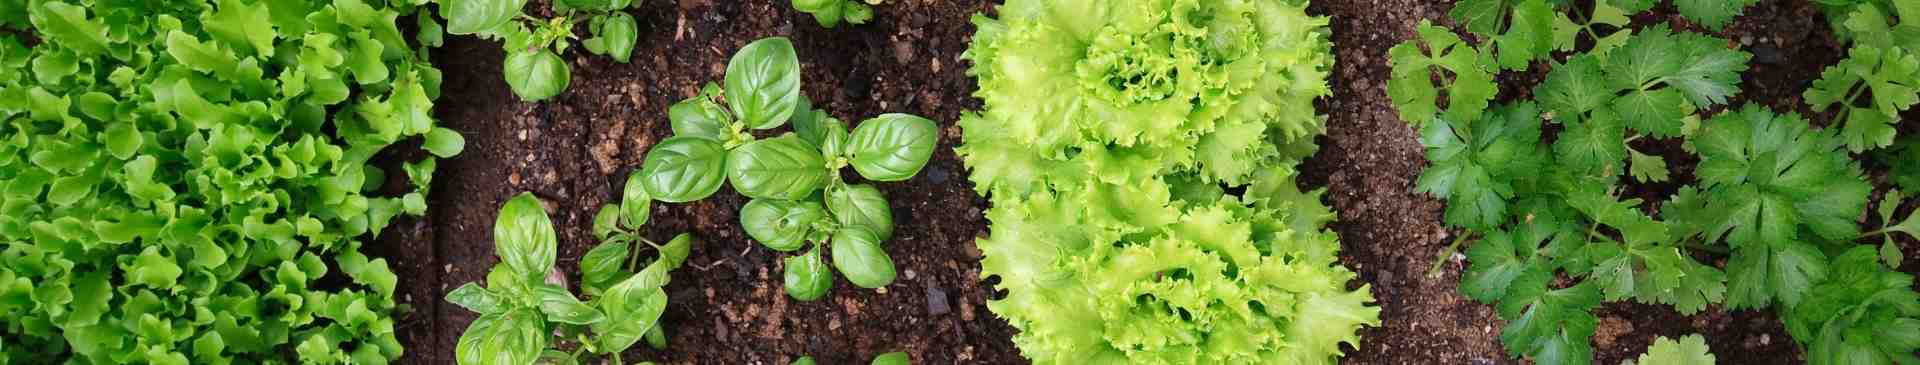 Planning Your Spring and Summer Veggie Patch